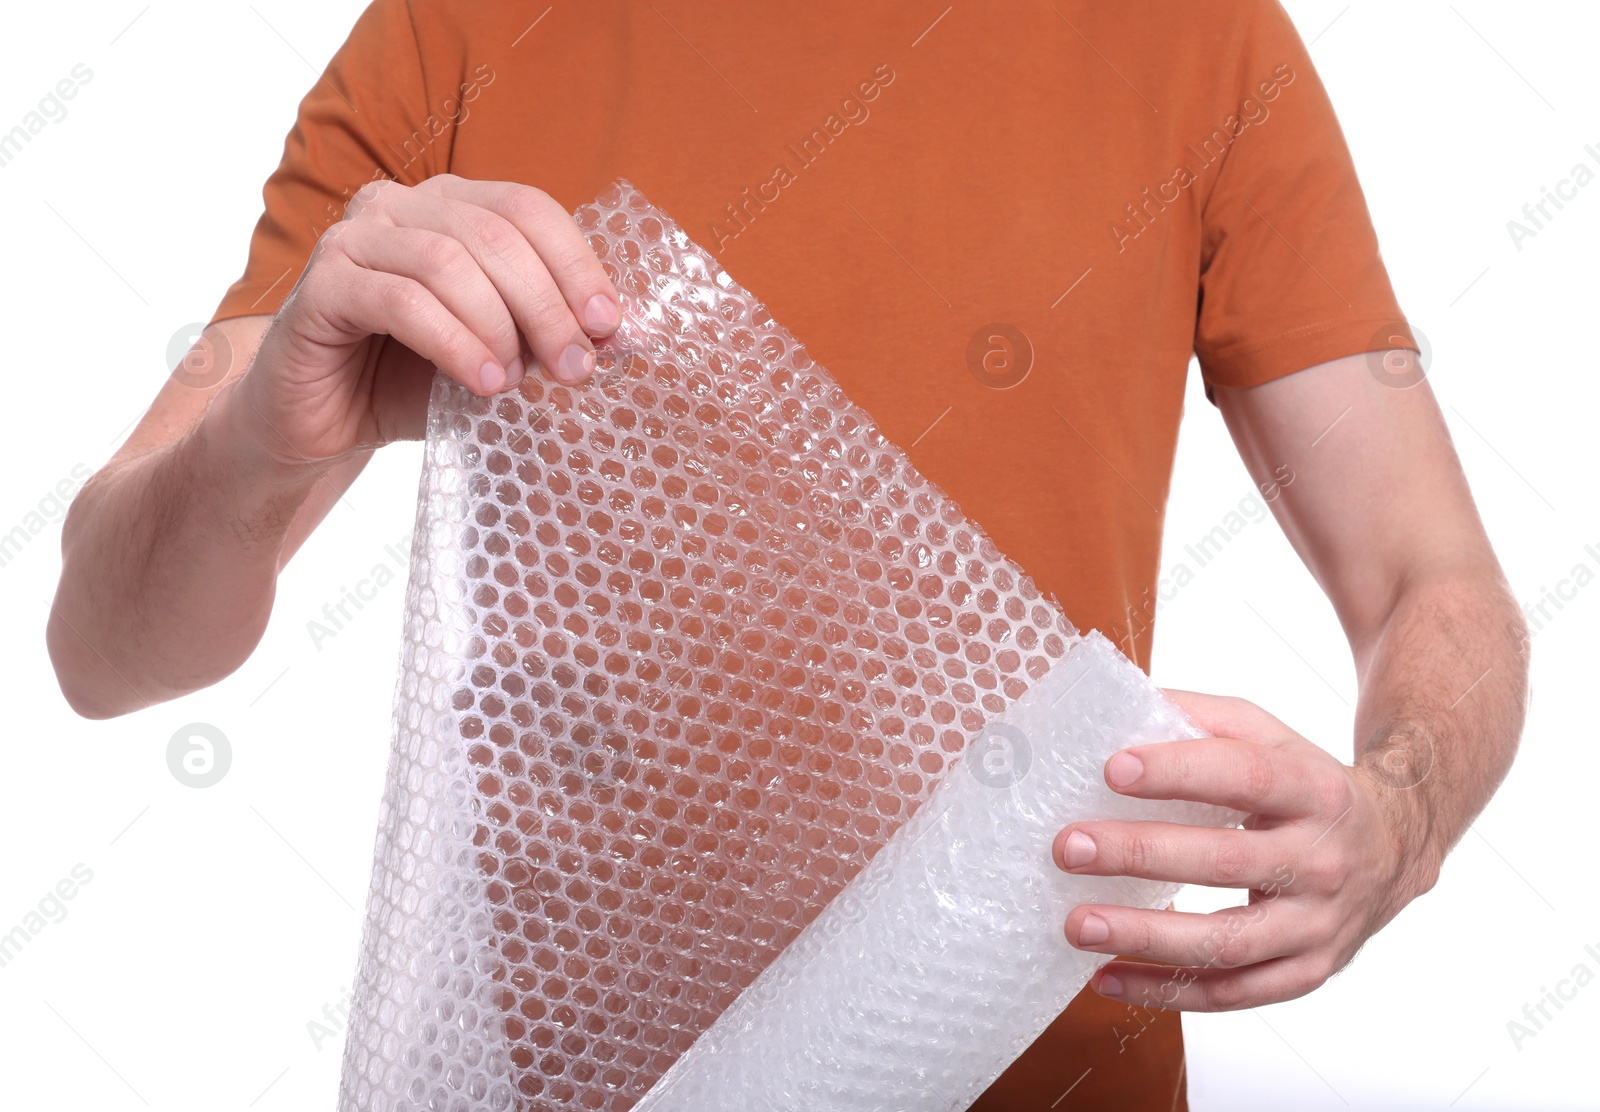 Photo of Man holding roll of bubble wrap on white background, closeup. Stress relief